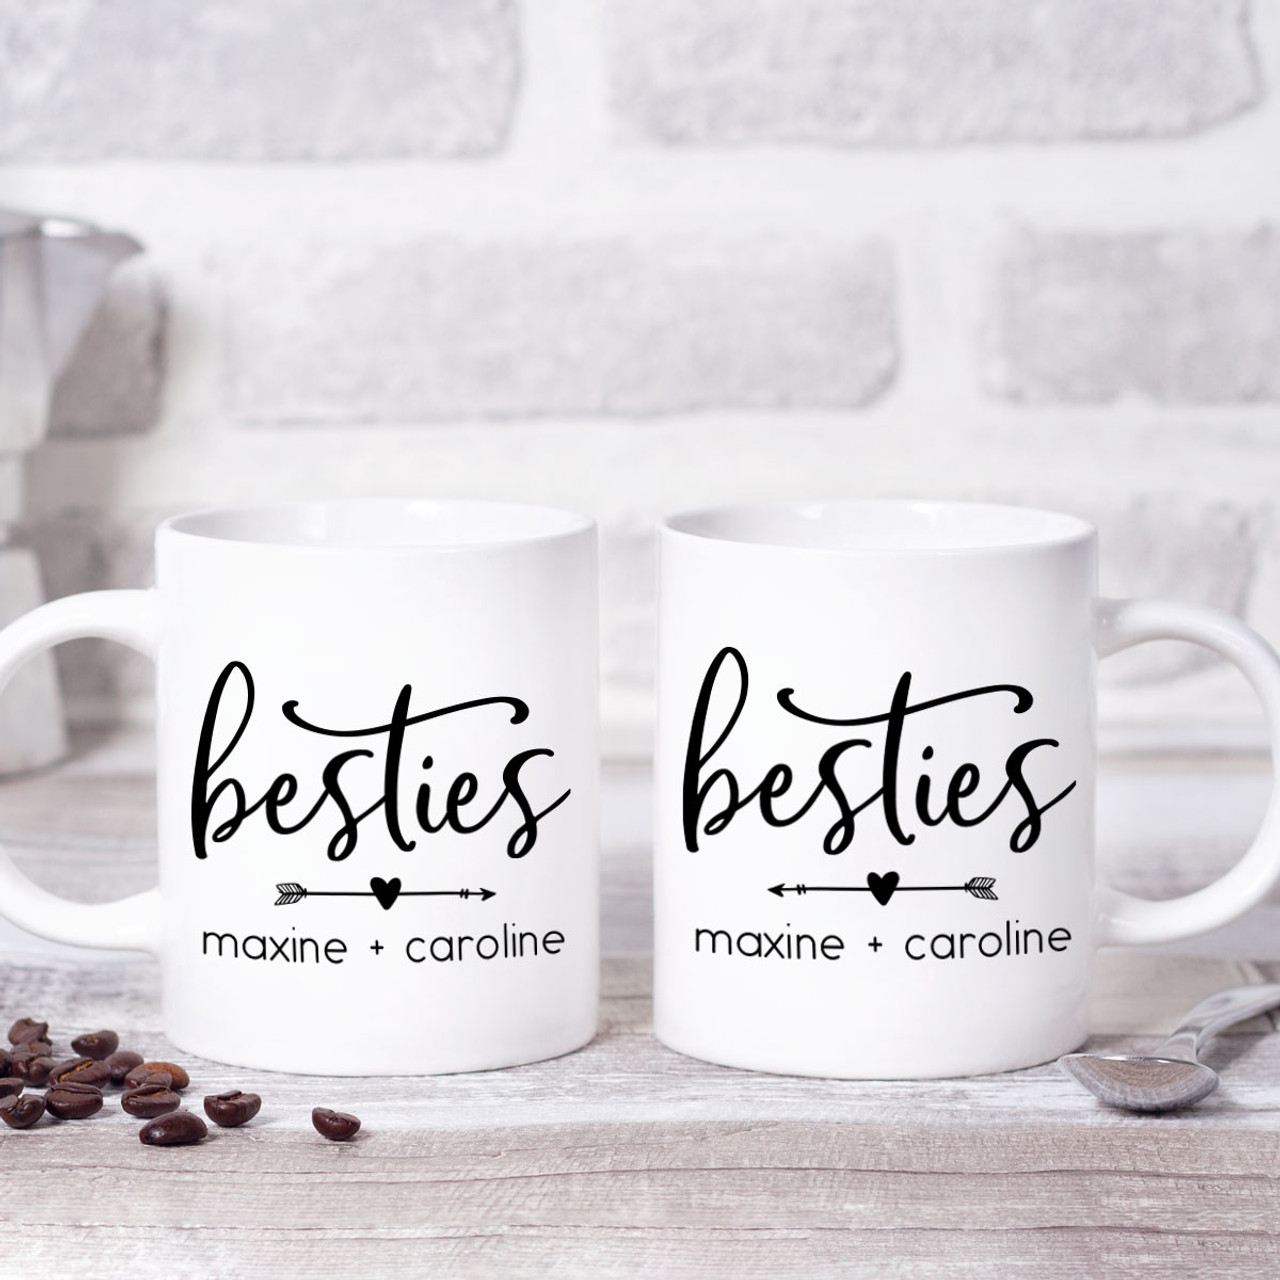 https://cdn11.bigcommerce.com/s-5grzuu6/images/stencil/1280x1280/products/3809/52310/Besties-Heart-Personalized-Matching-Mug-Set-for-Best-Friends__39894.1672688659.jpg?c=2